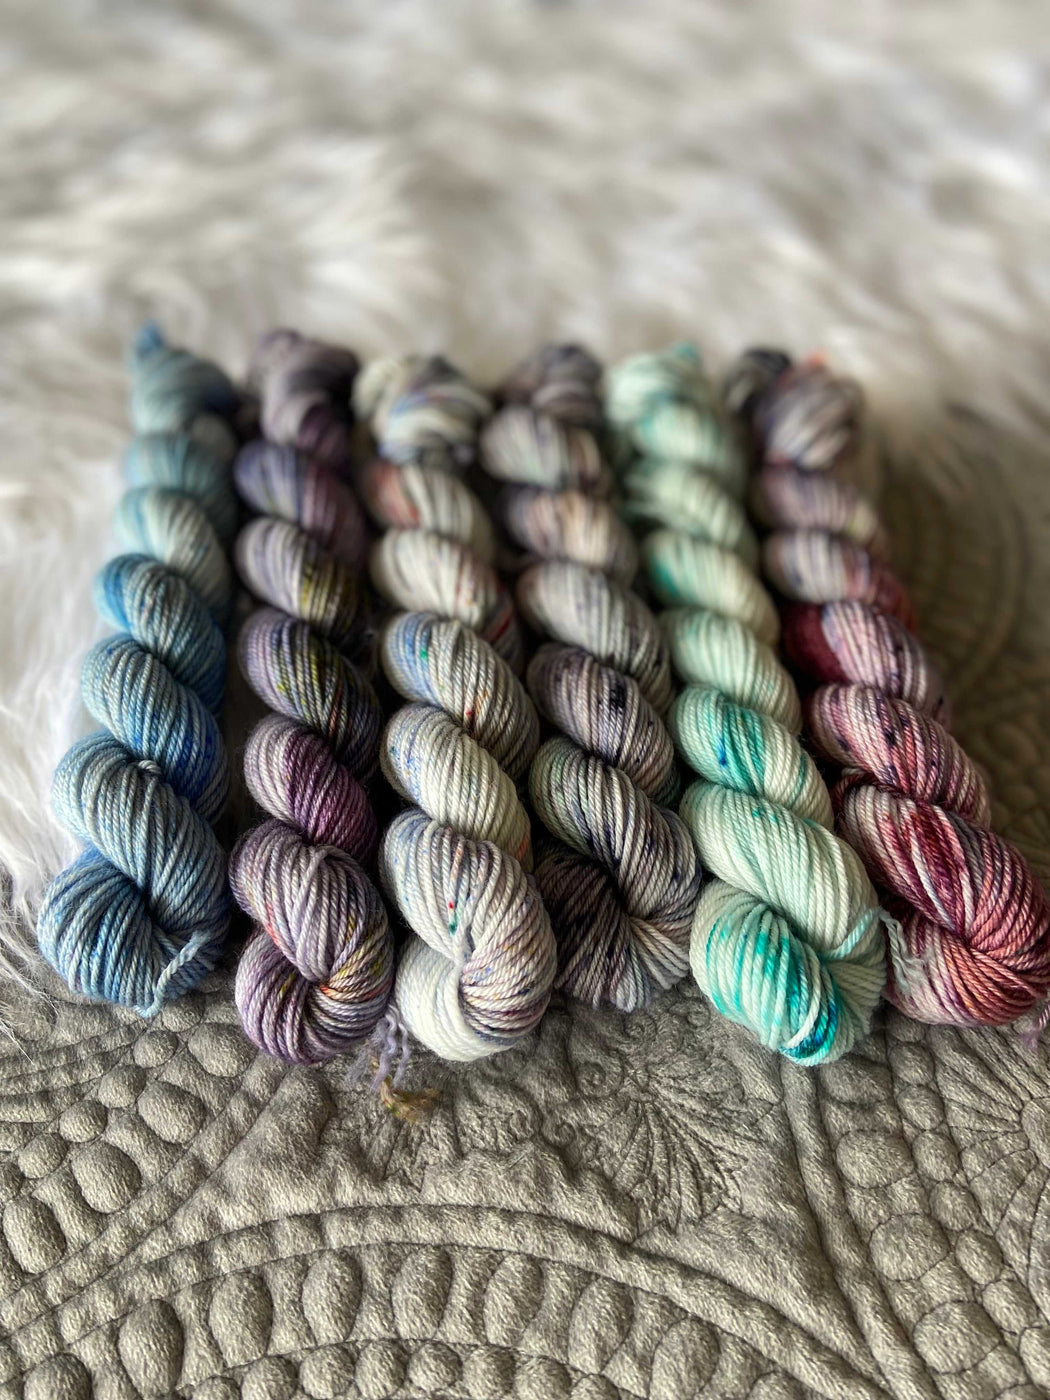 Lake Shore Drive /// OOAK Minis Collection - Ruby and Roses Yarn